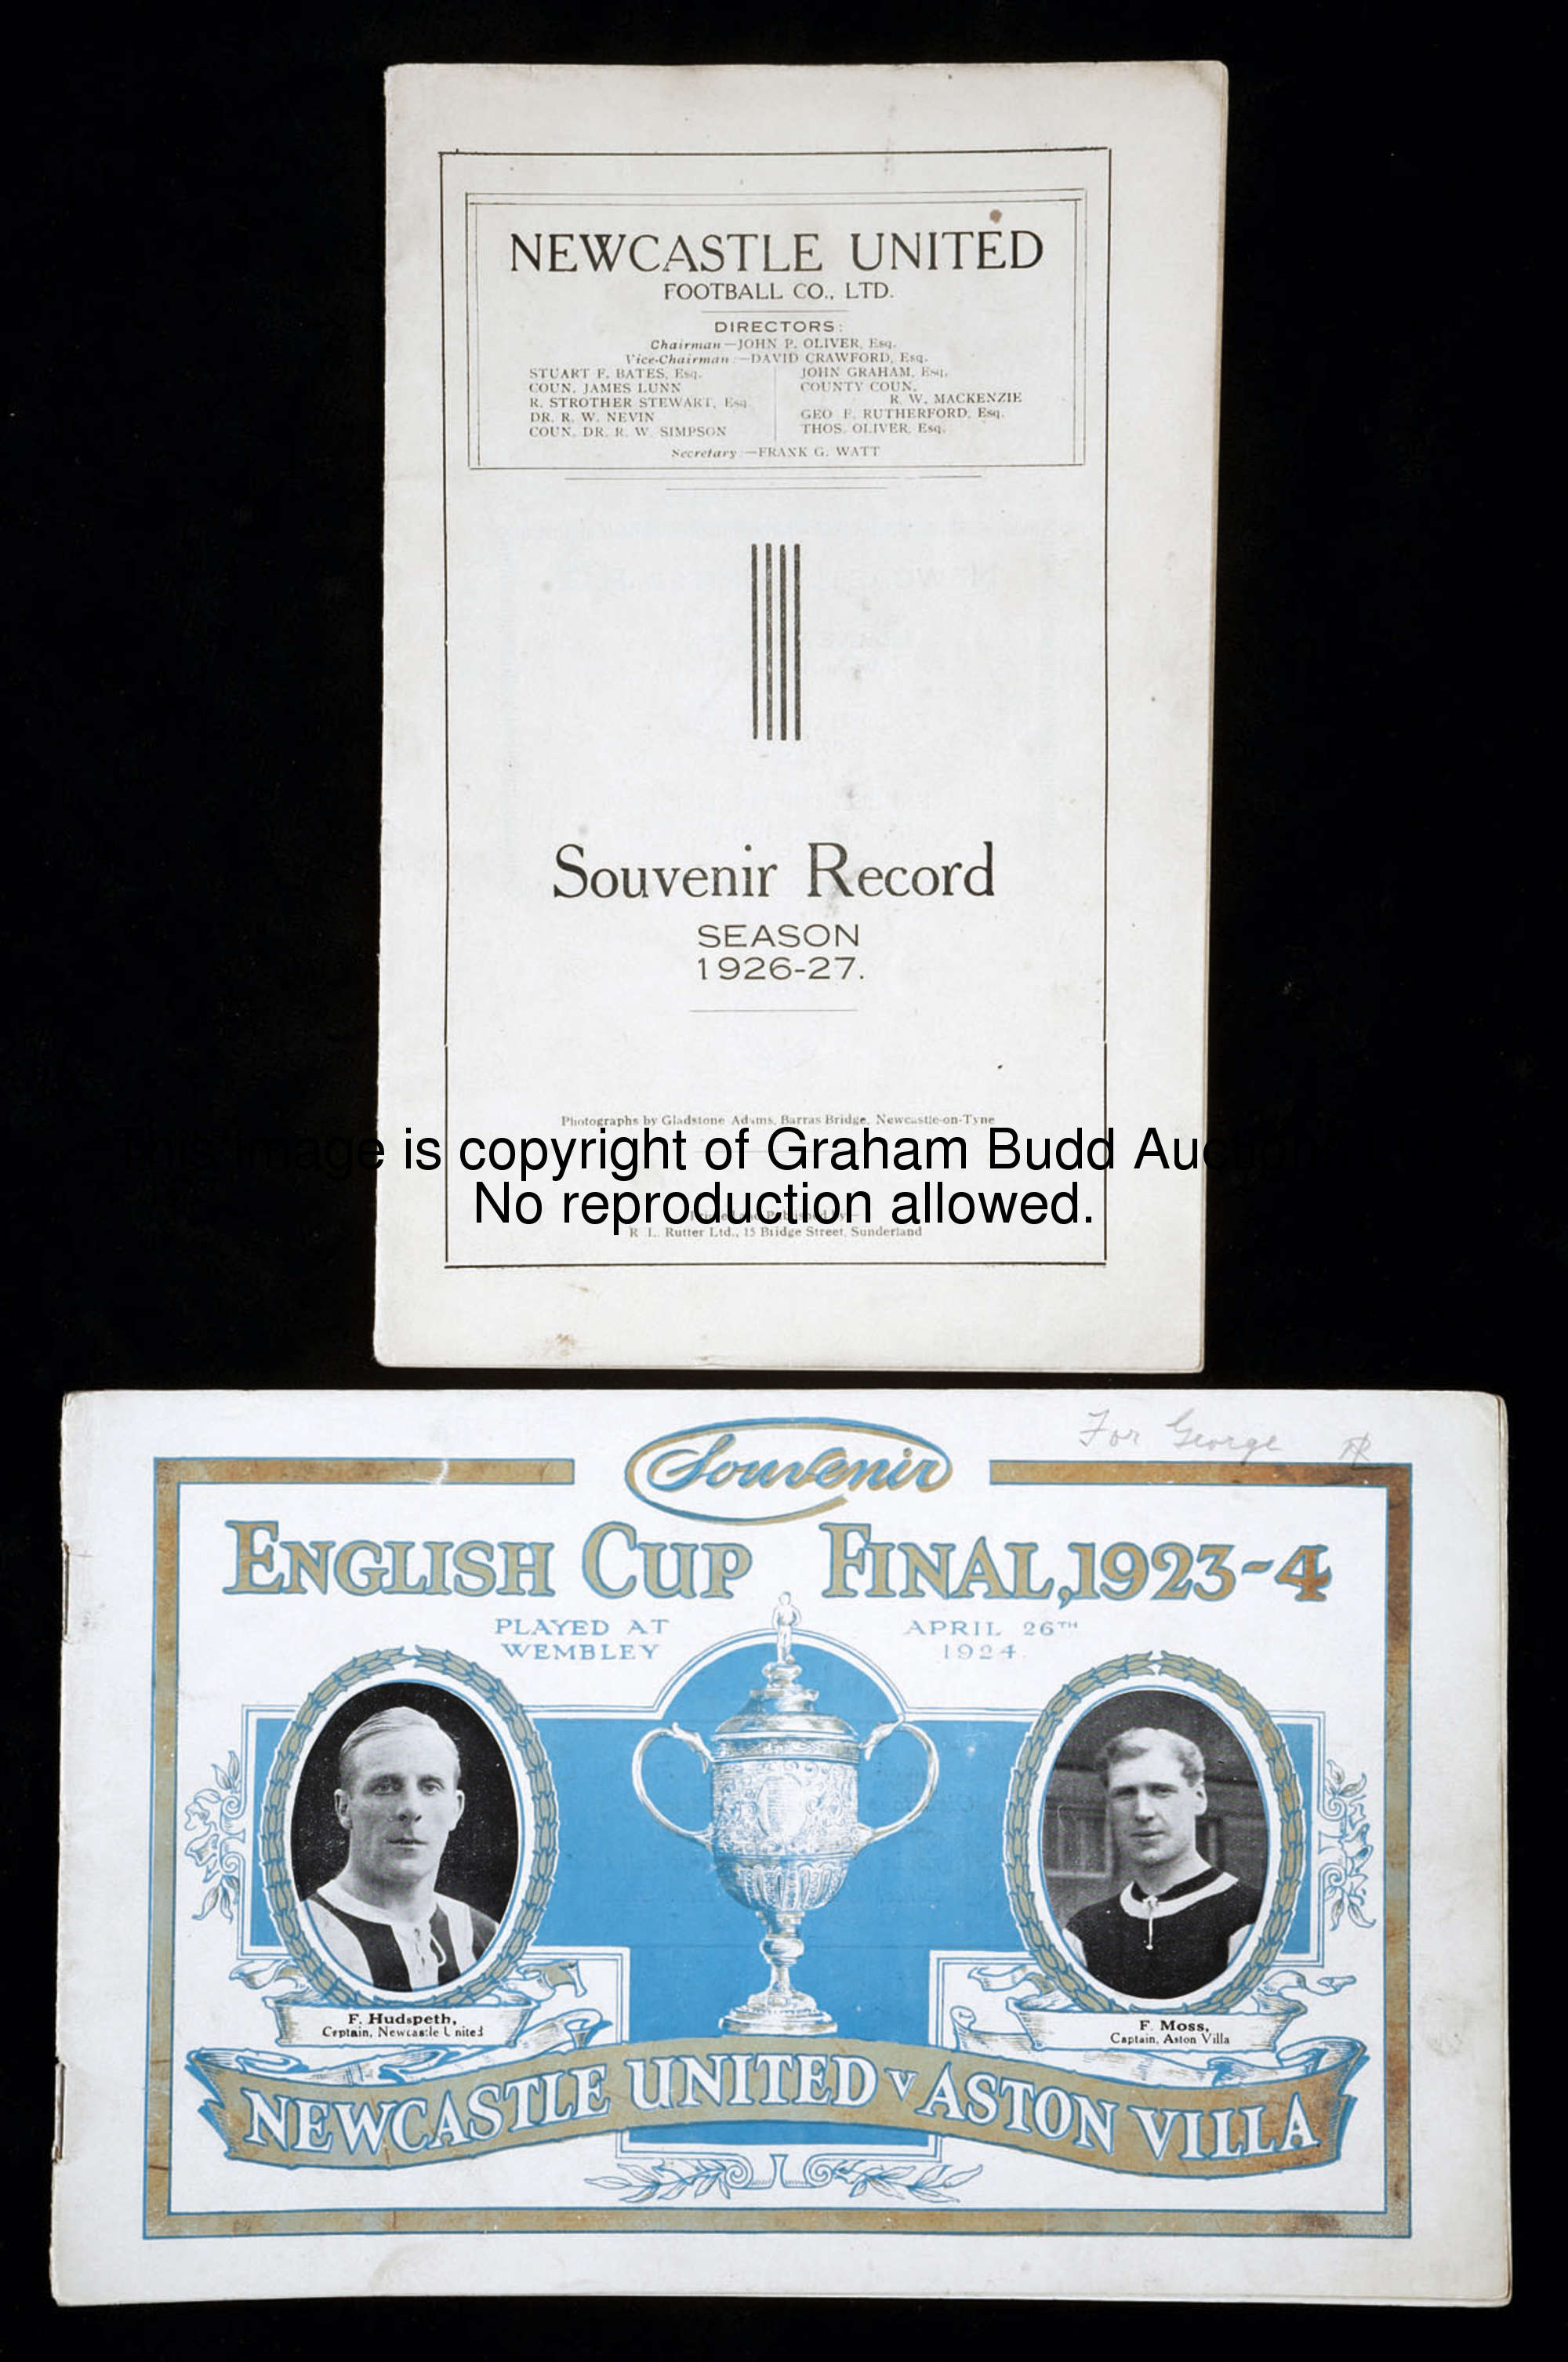 A souvenir programme for the 1924 F.A. Cup final Newcastle United v Aston Villa, sold with a Newcast...